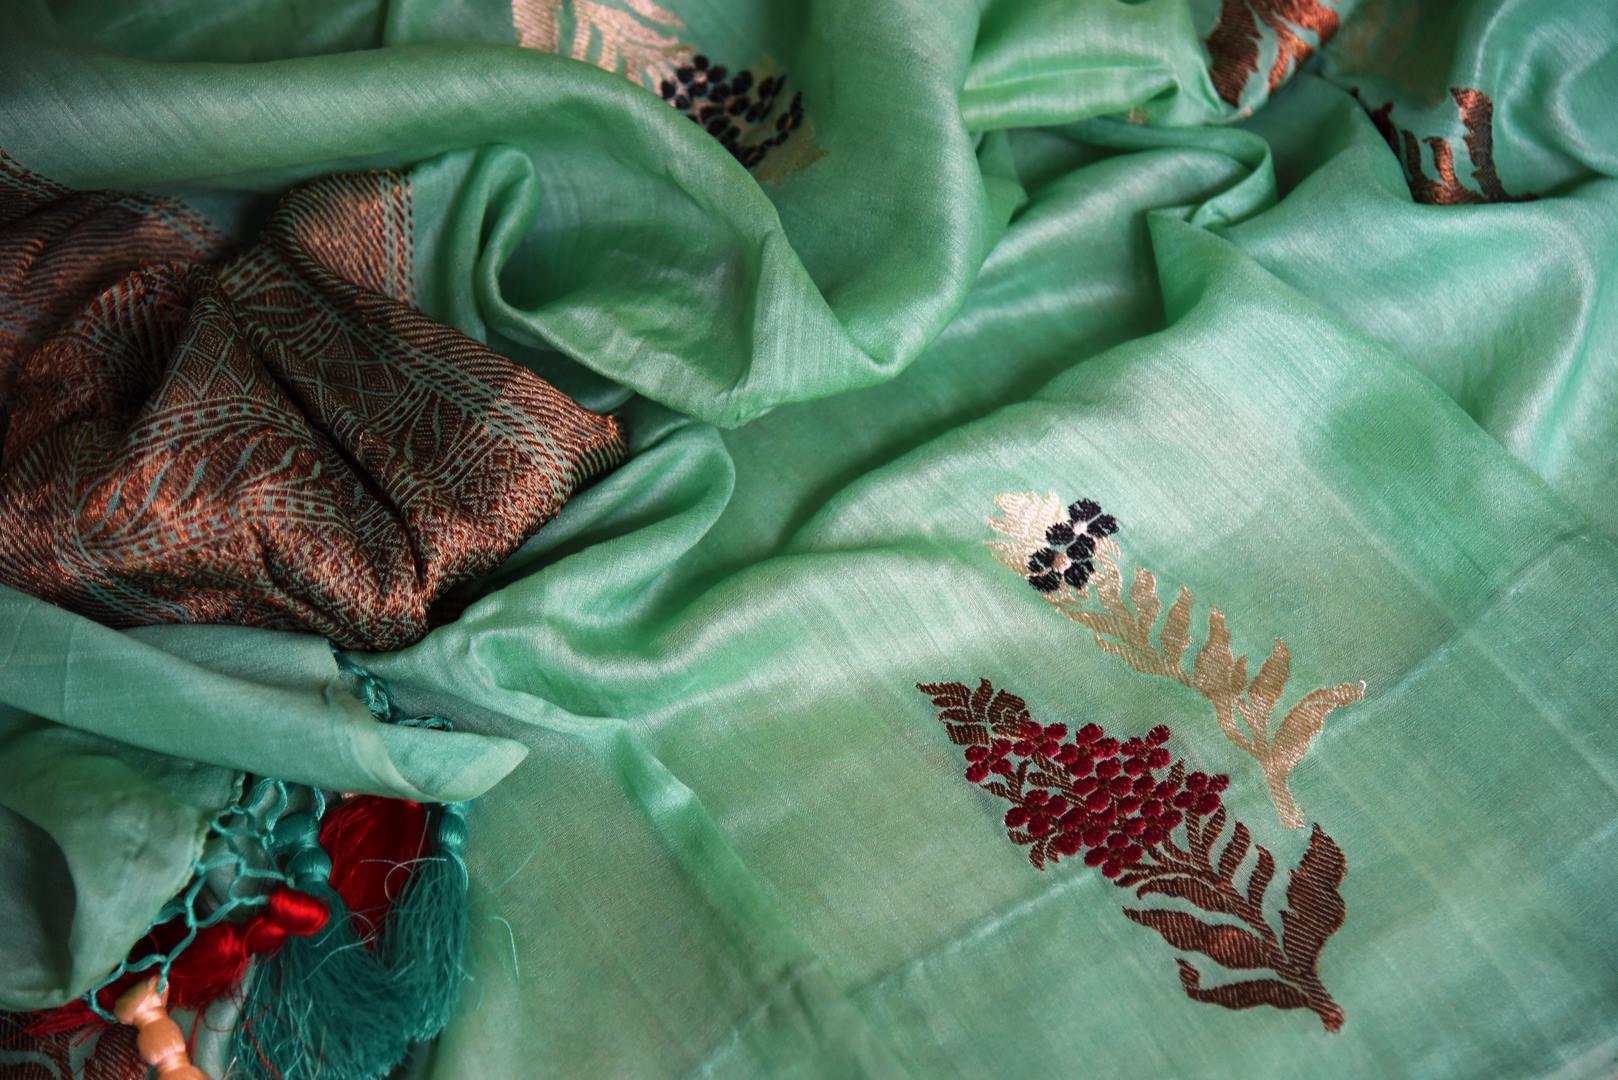 Buy pastel green muga Banarasi sari online in USA with floral buta from Pure Elegance online store. Visit our exclusive Indian clothing store in USA and get floored by a range of exquisite Indian Kanjivaram saris, Banarasi sarees, silk sarees, Indian jewelry and much more to complete your ethnic look.-details